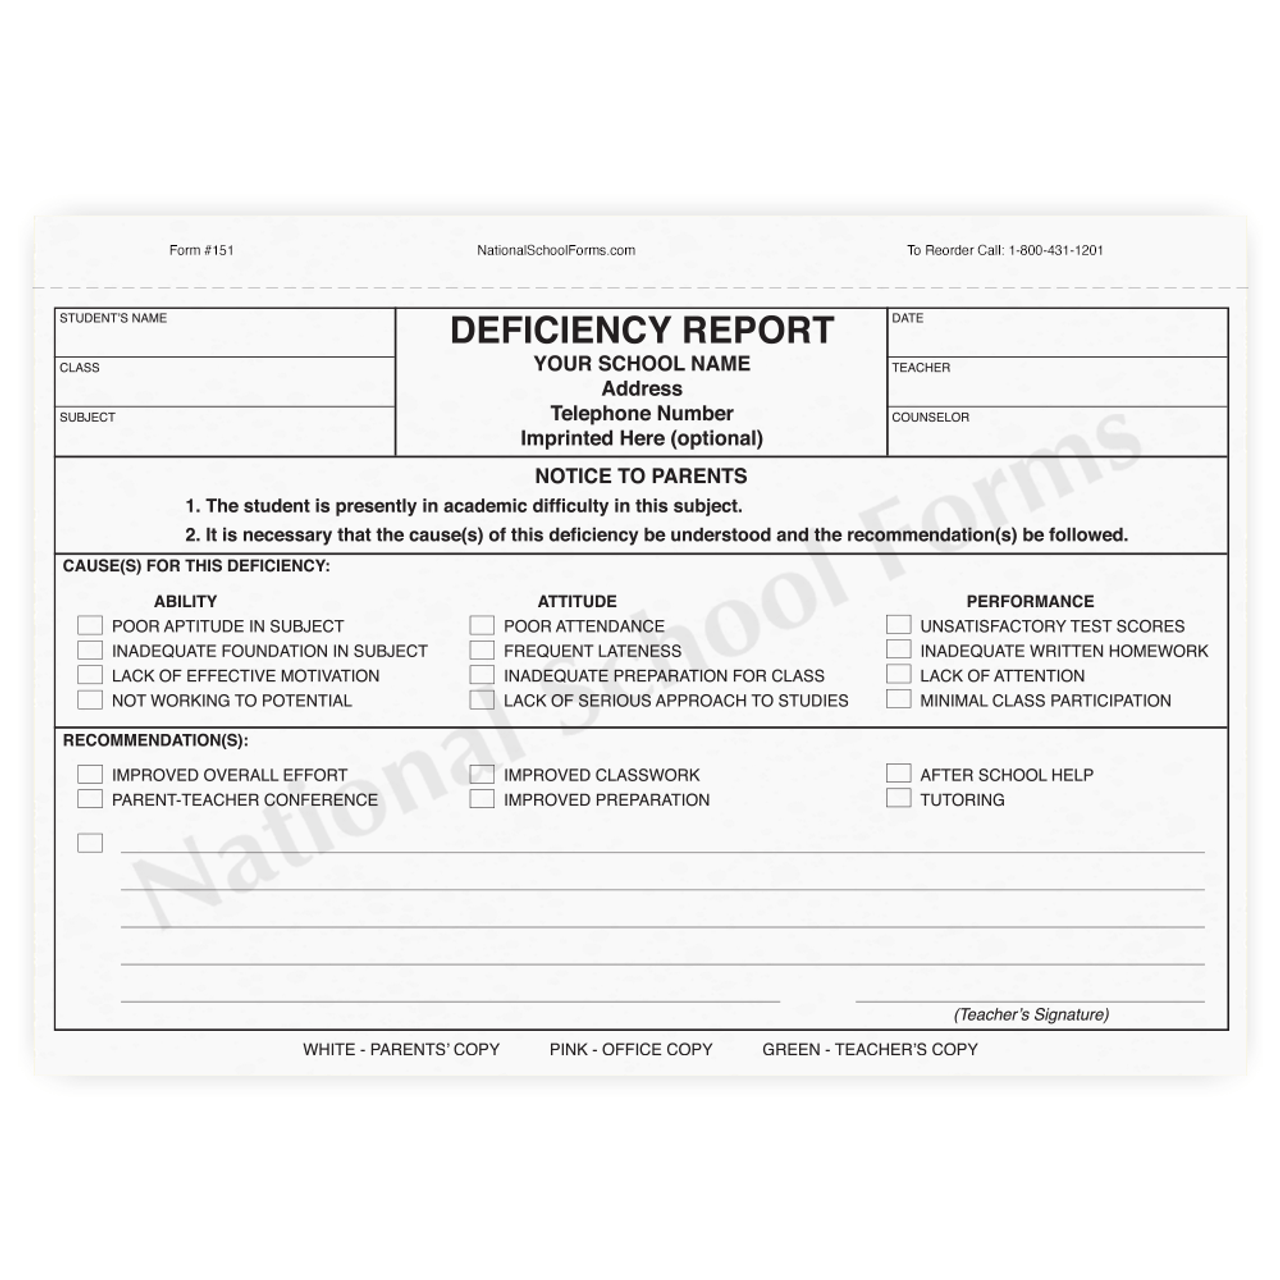 Deficiency Report - 3 part carbonless form (151) with optional Imprint